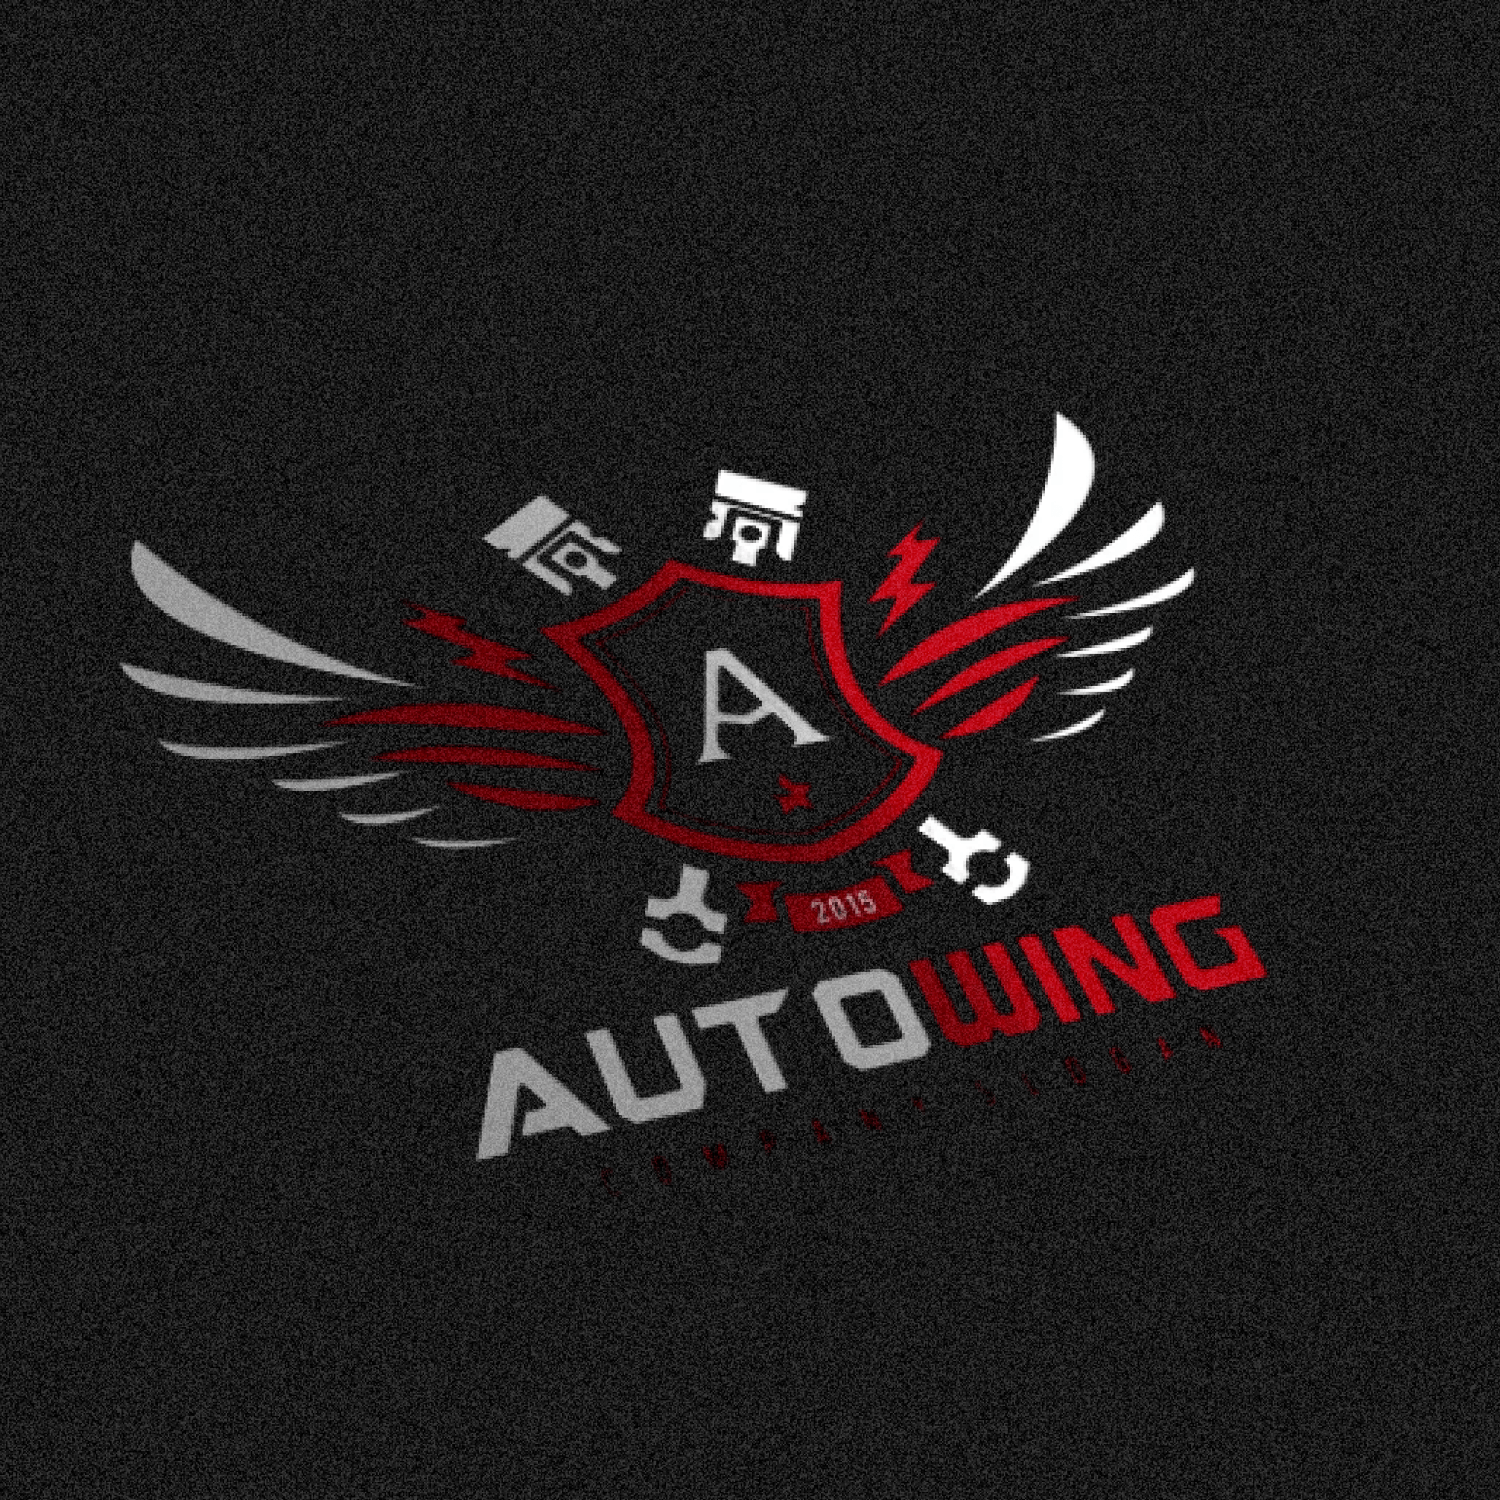 Many Logos Autowing.